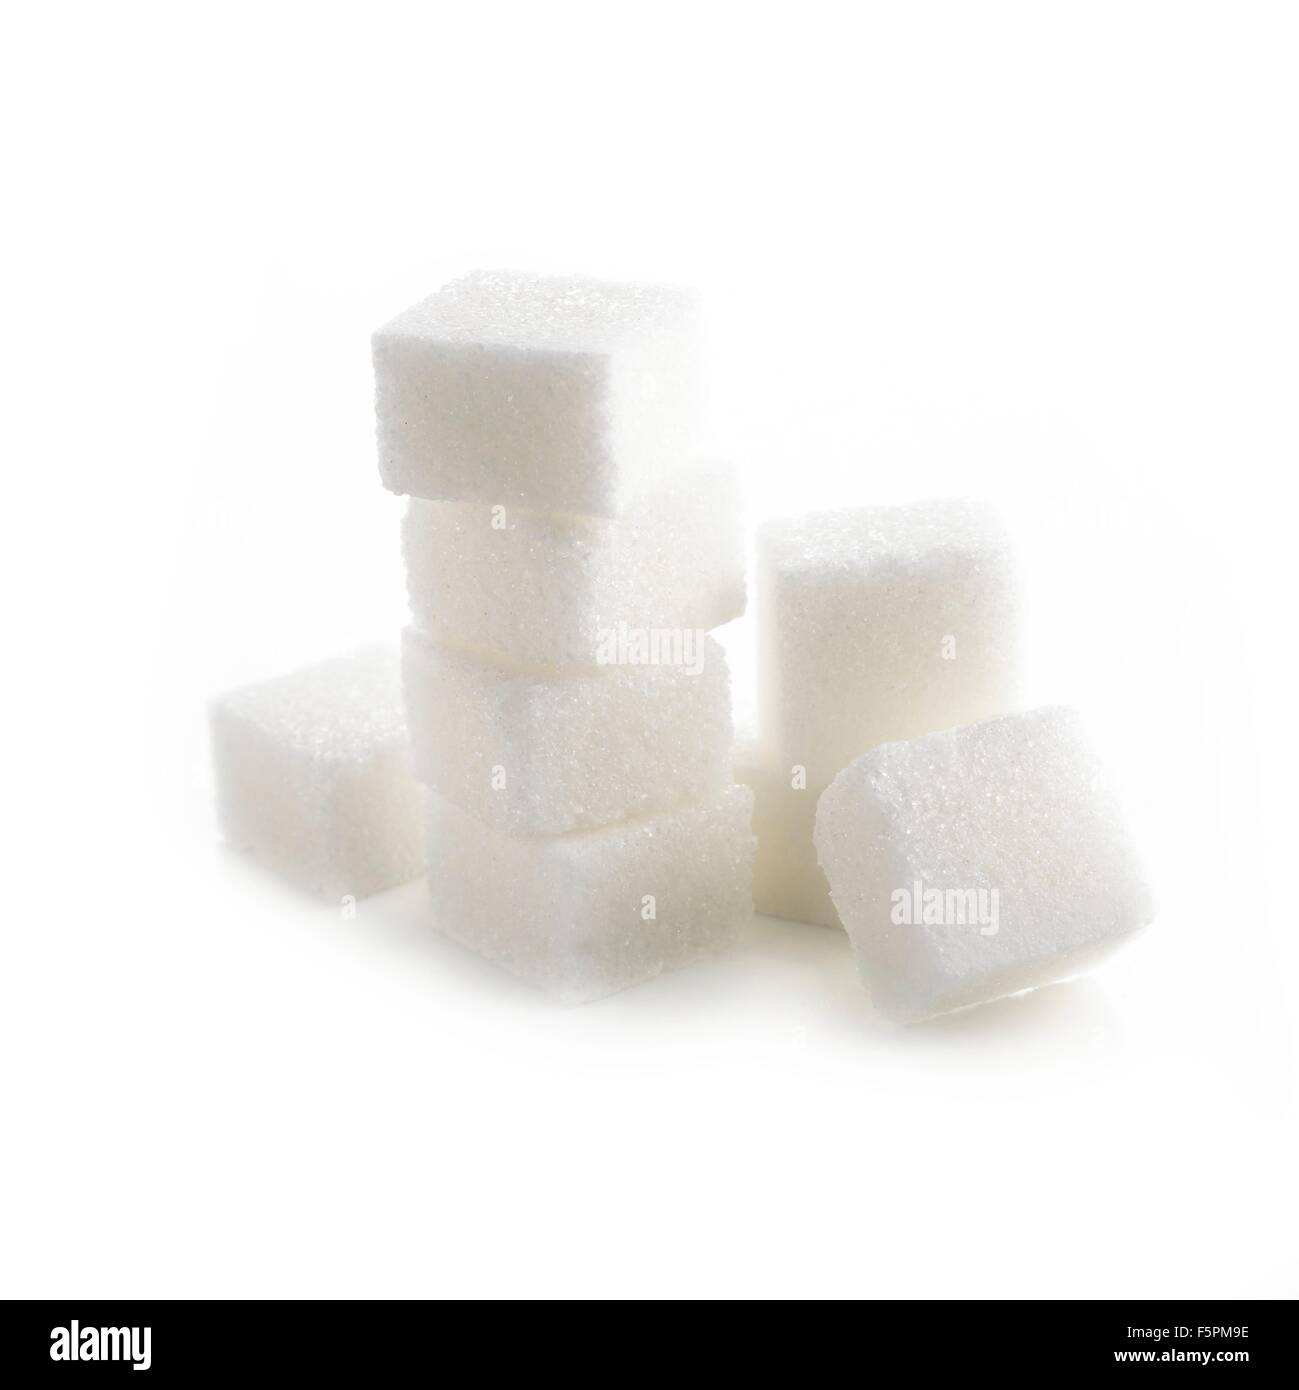 Sugar lumps against a white background Stock Photo - Alamy